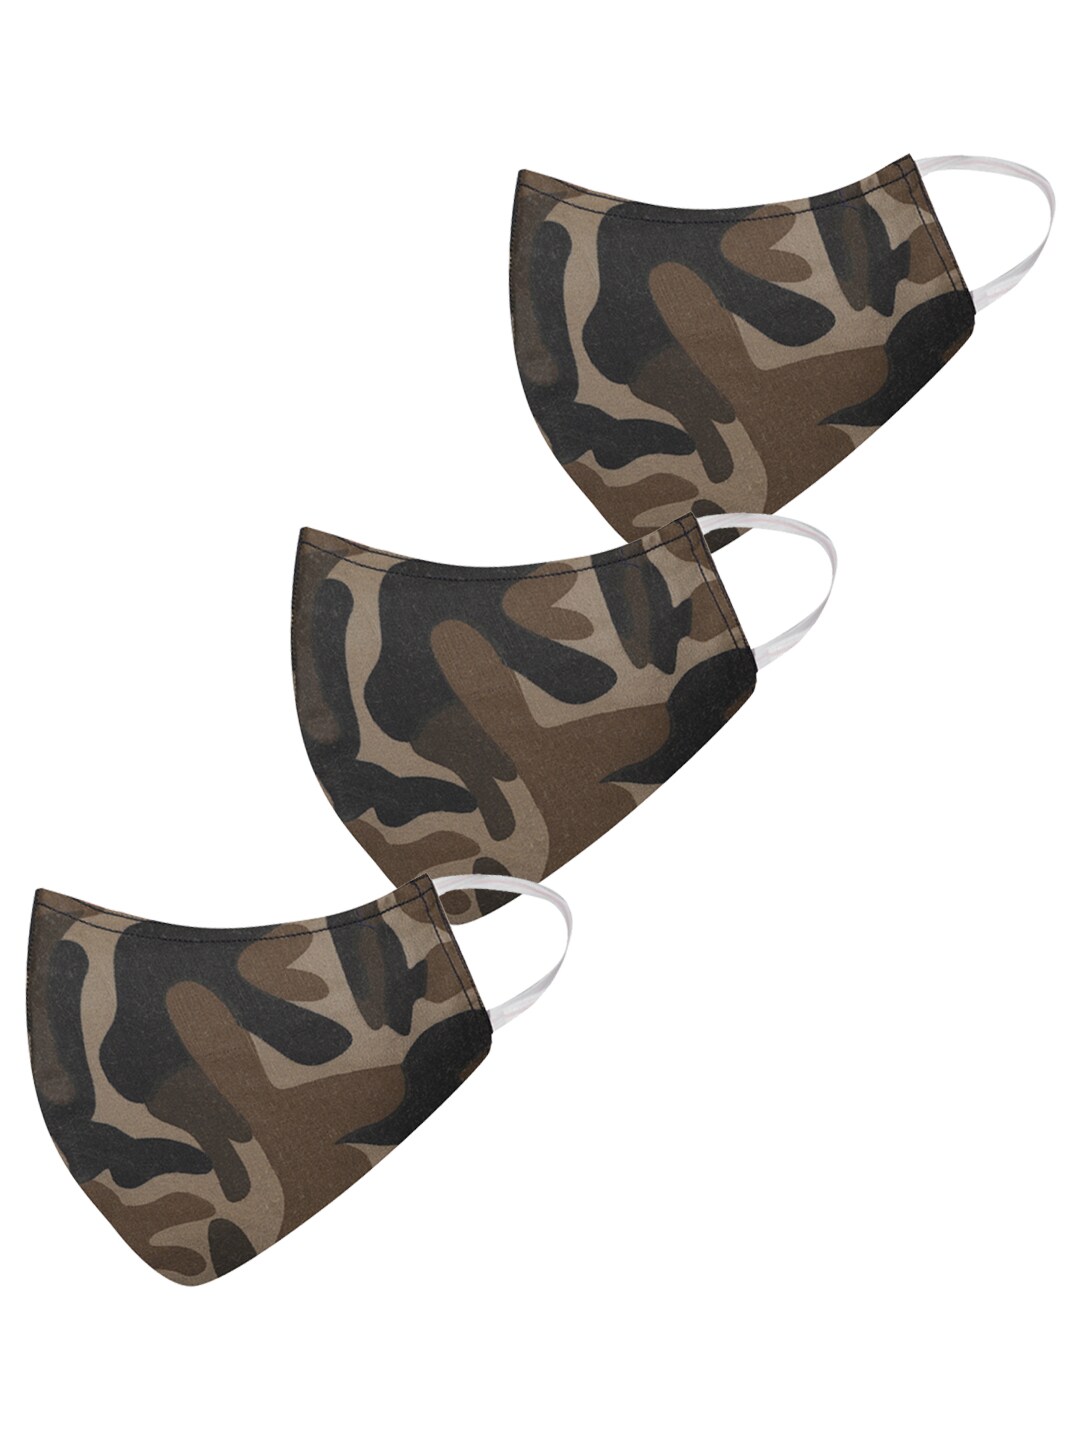 VASTRAMAY Unisex Set of 3 Camouflage Print Reusable 3-Ply Protective Outdoor Face Masks Price in India